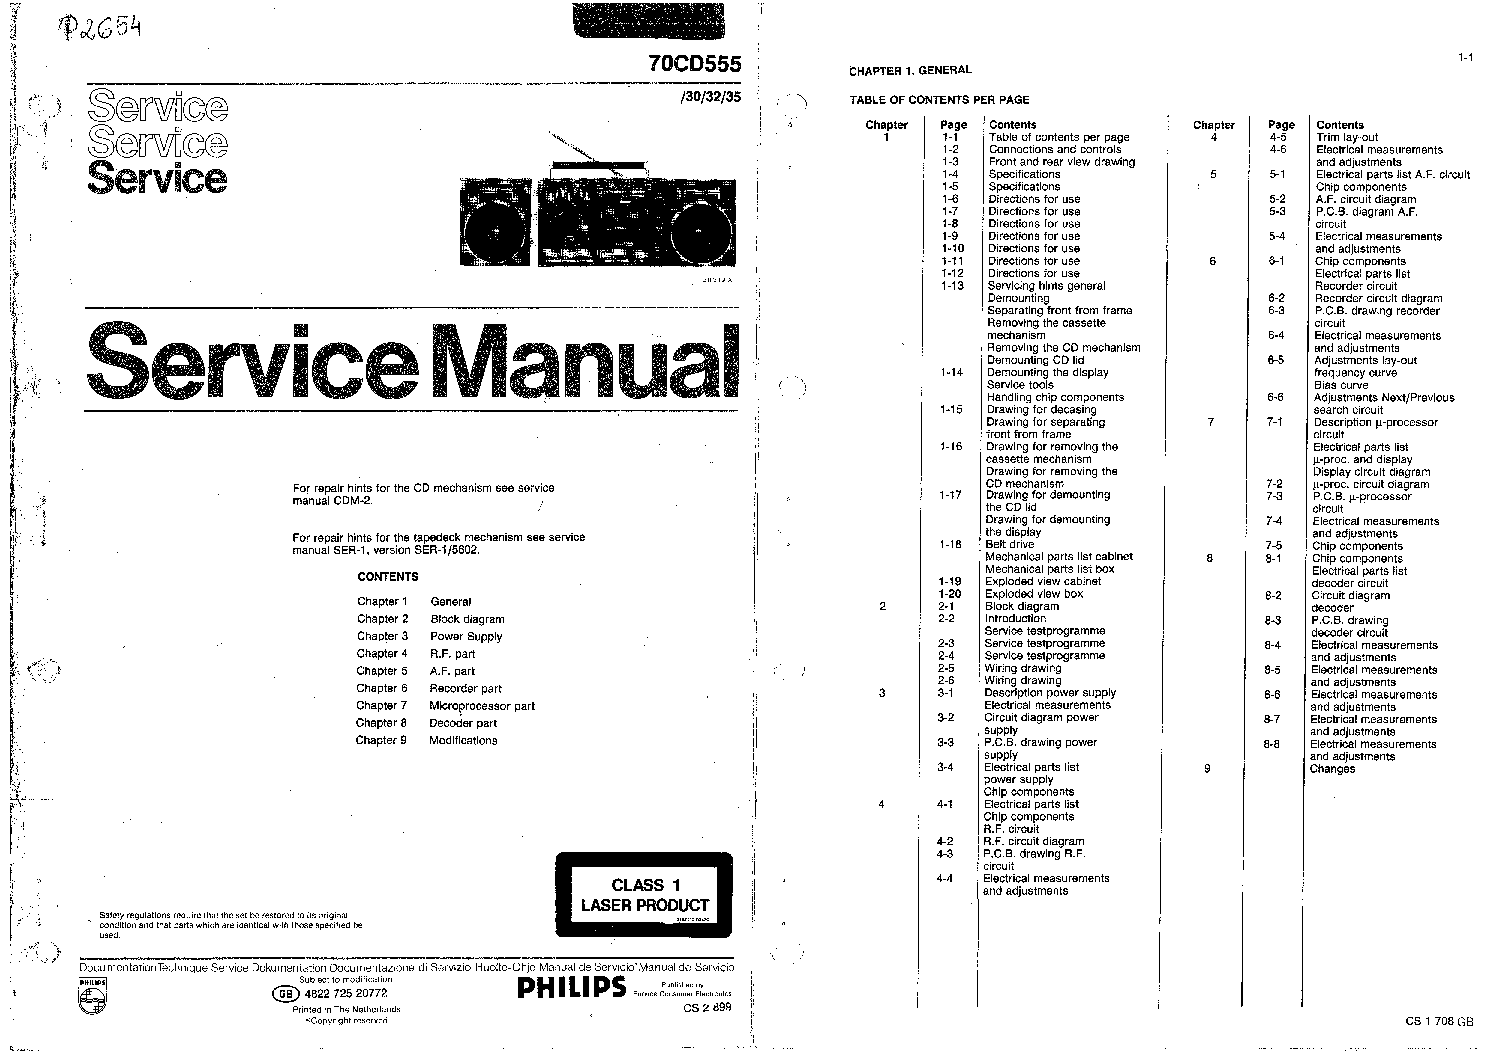 PHILIPS 70CD555 30 32 35 service manual (1st page)